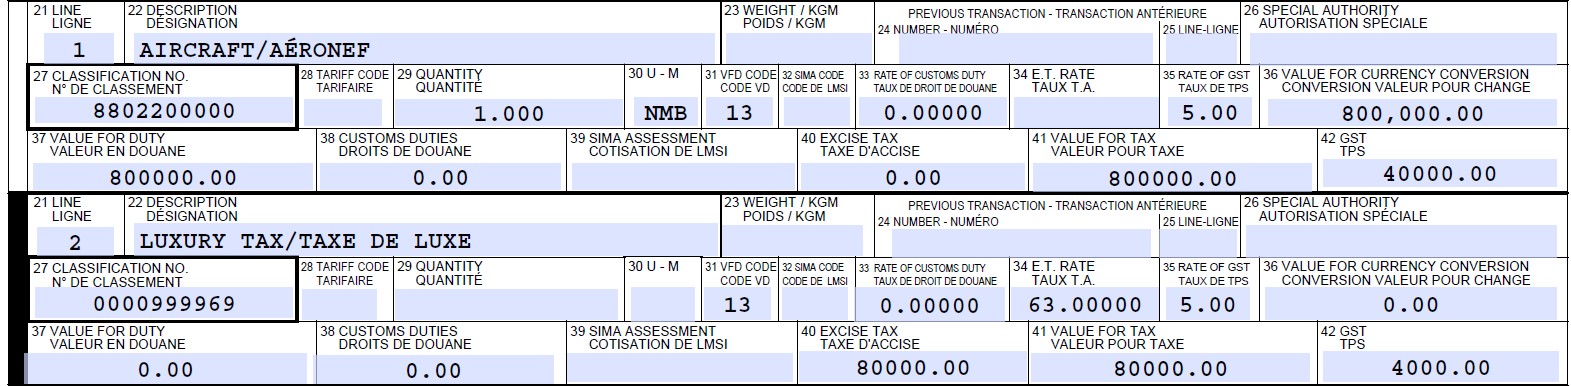 Example 2 of Form B3-3, Canada Customs Coding Form